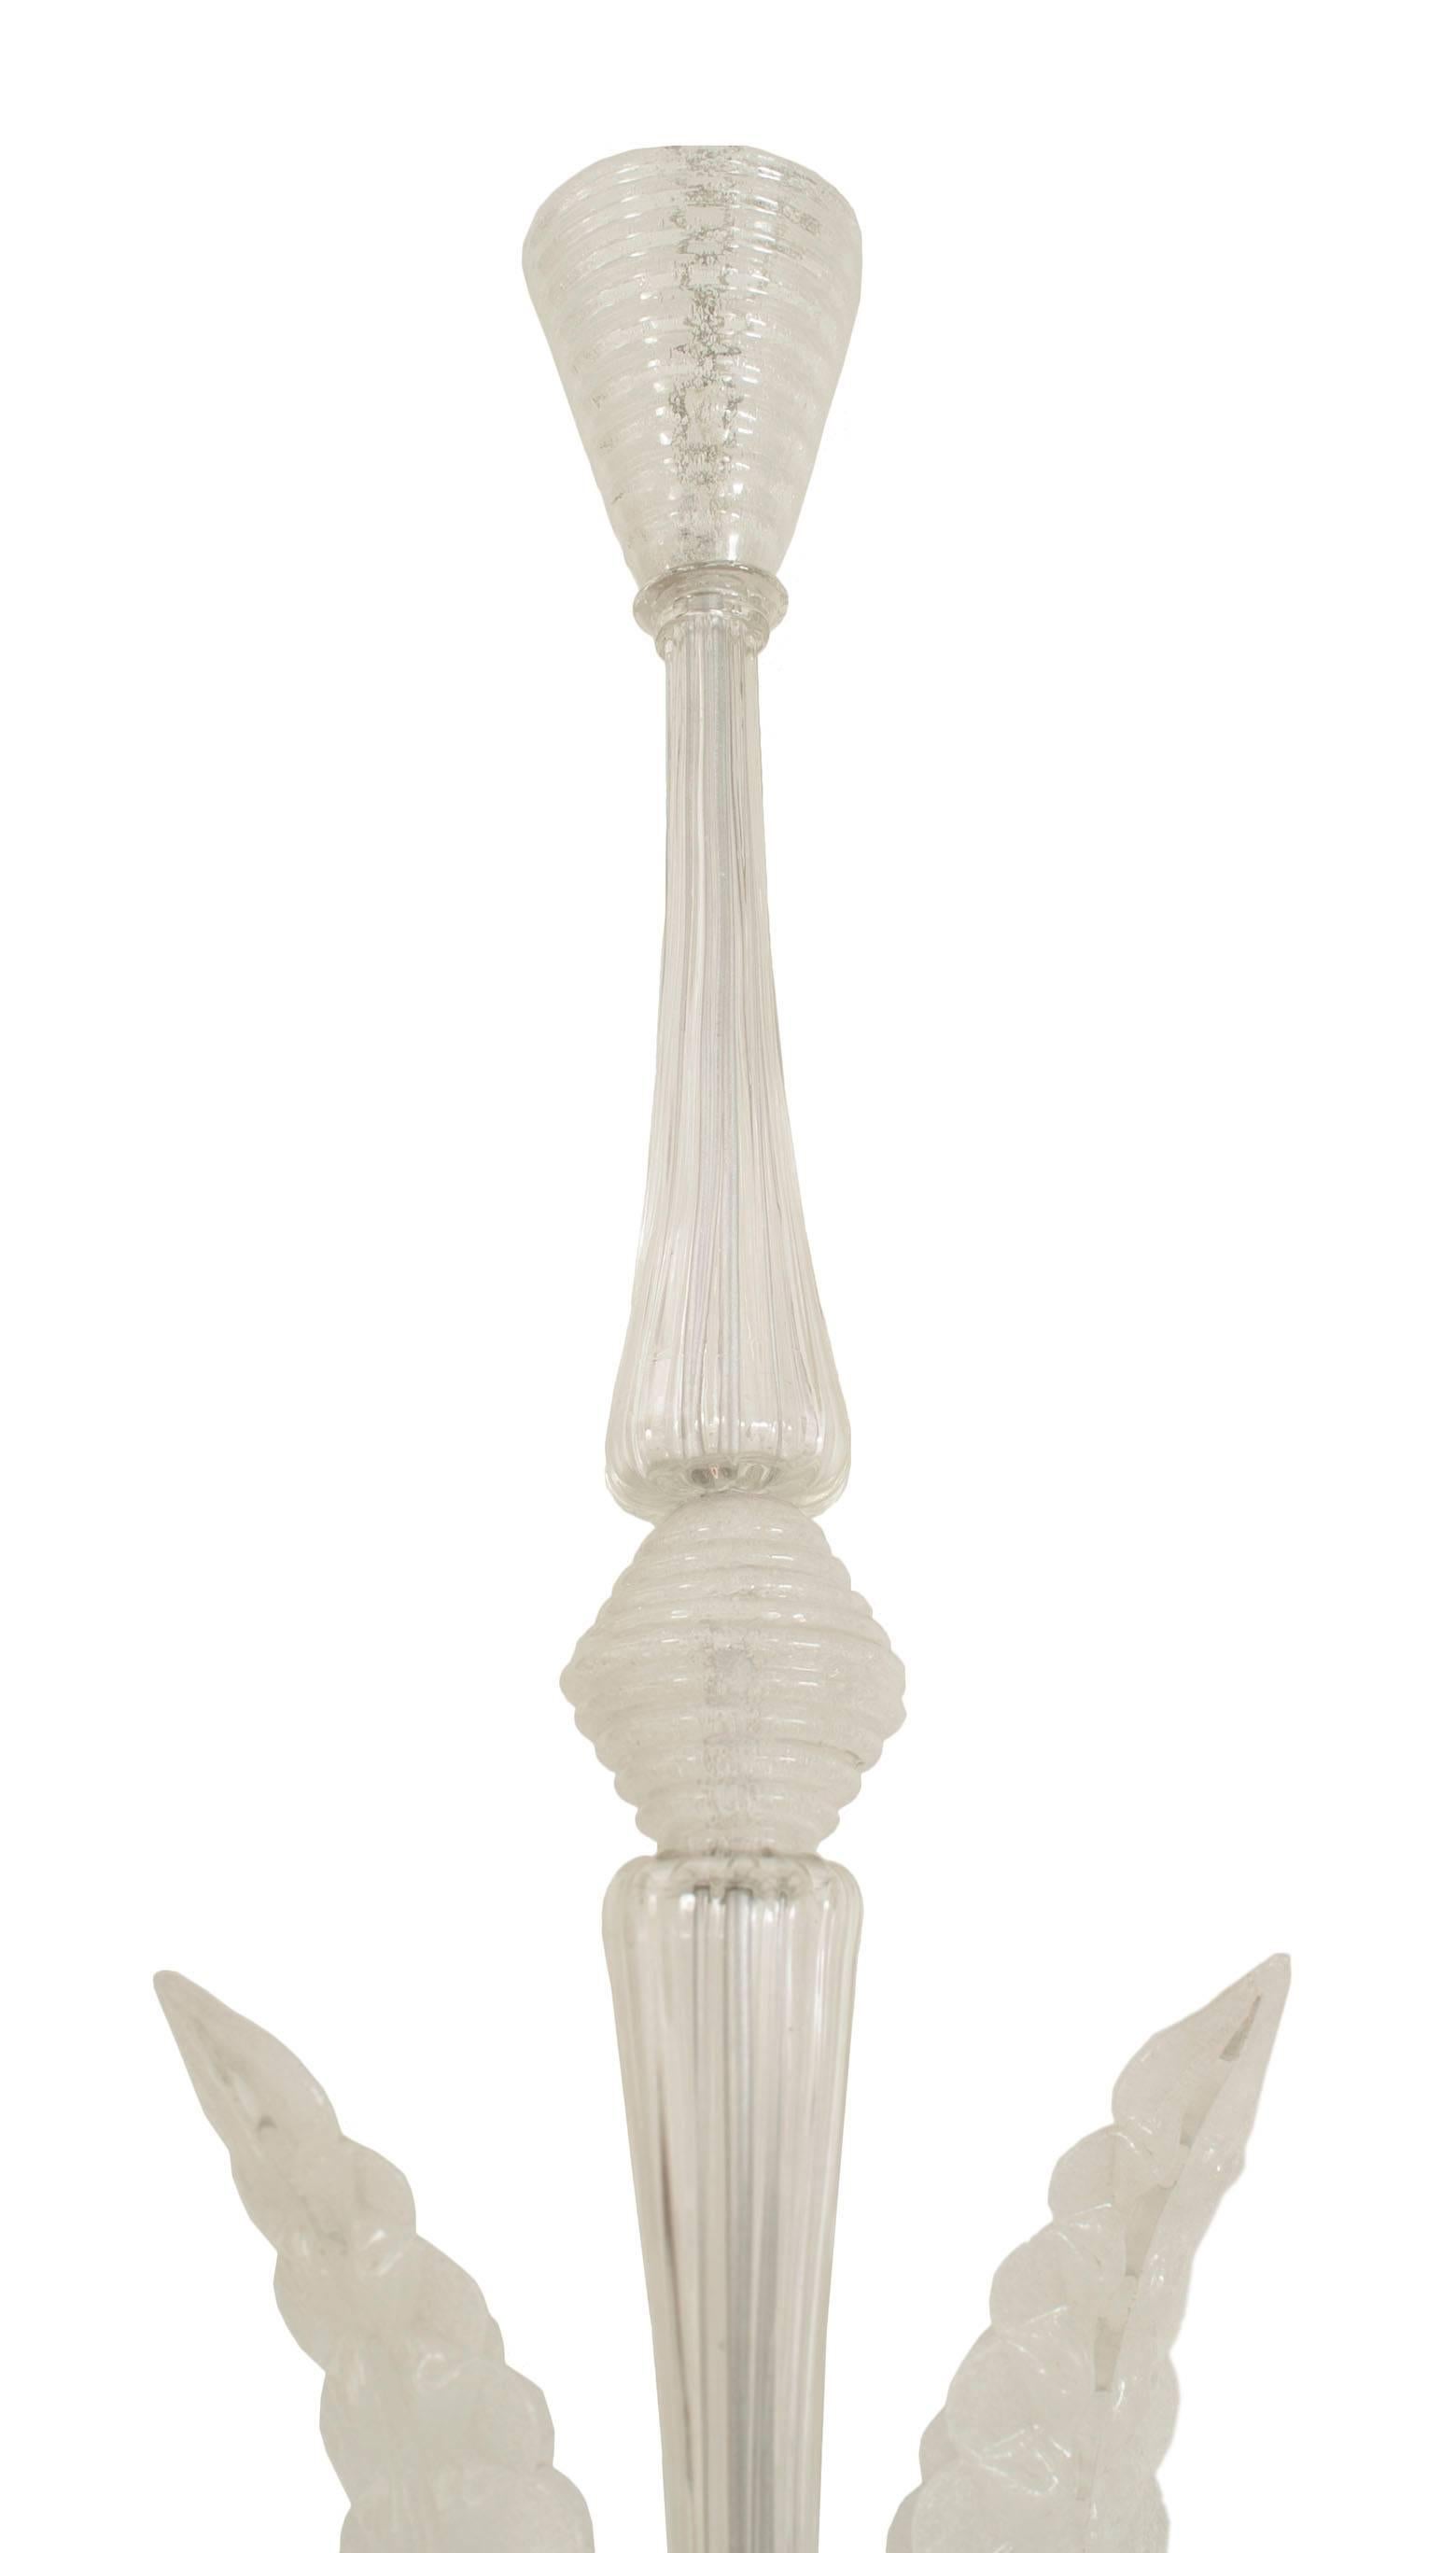 Italian Murano 1940s chandelier with 4 feathers and scroll arms supporting full form shades with applied glass trim emanating from a tiered bowl with a finial bottom (by BAROVIER ET TOSO)
